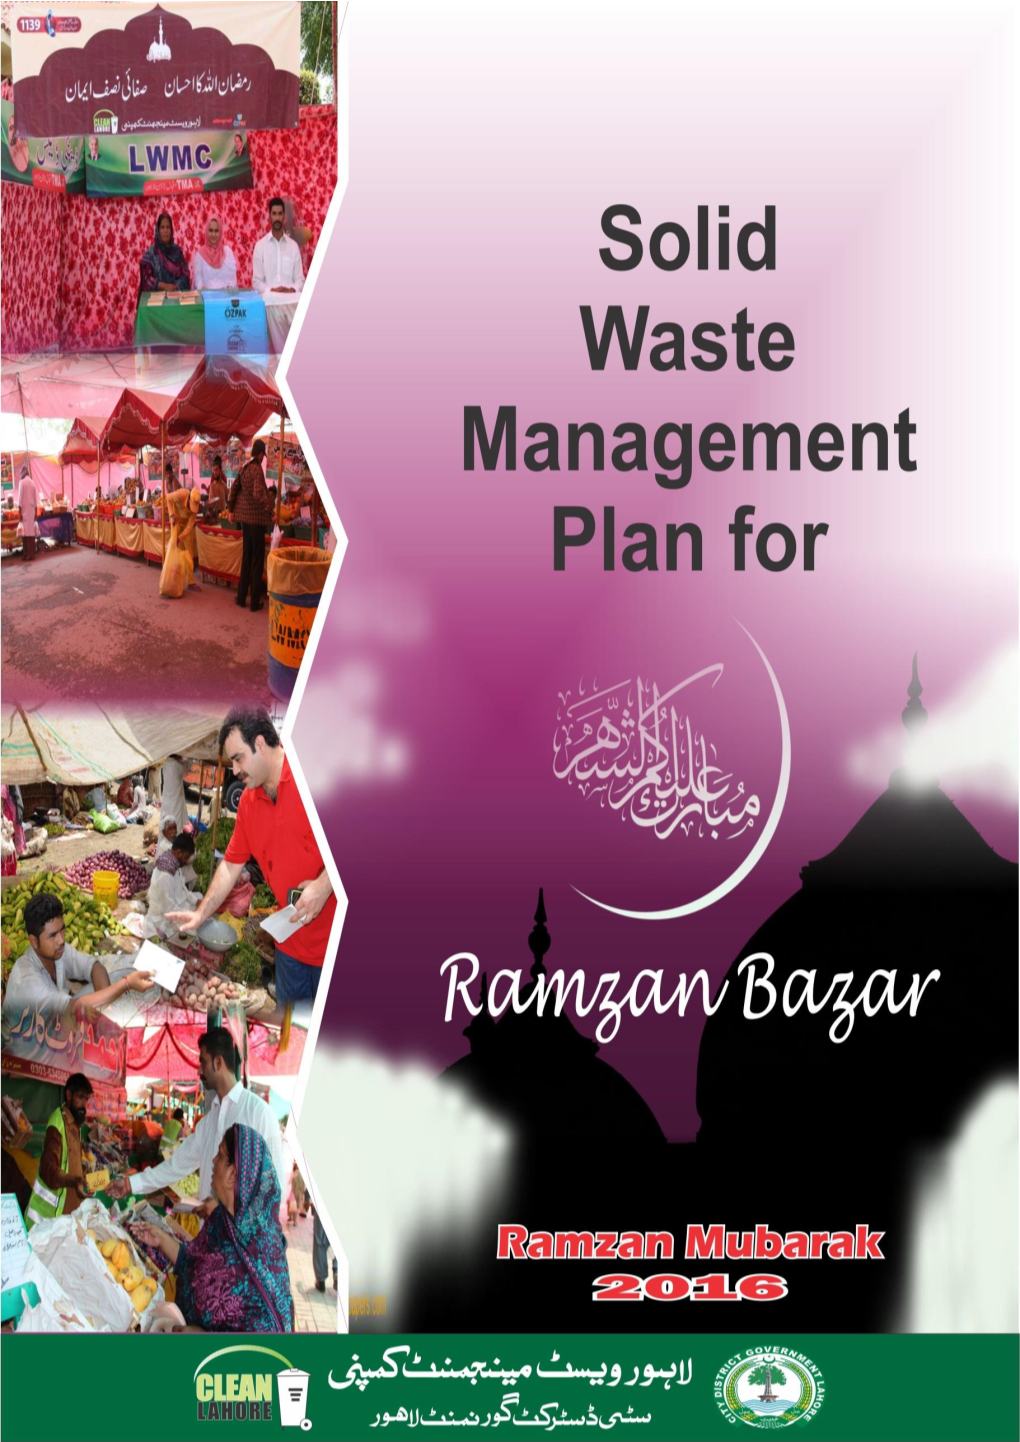 Solid Waste Management Plan for the Month of Ramzan